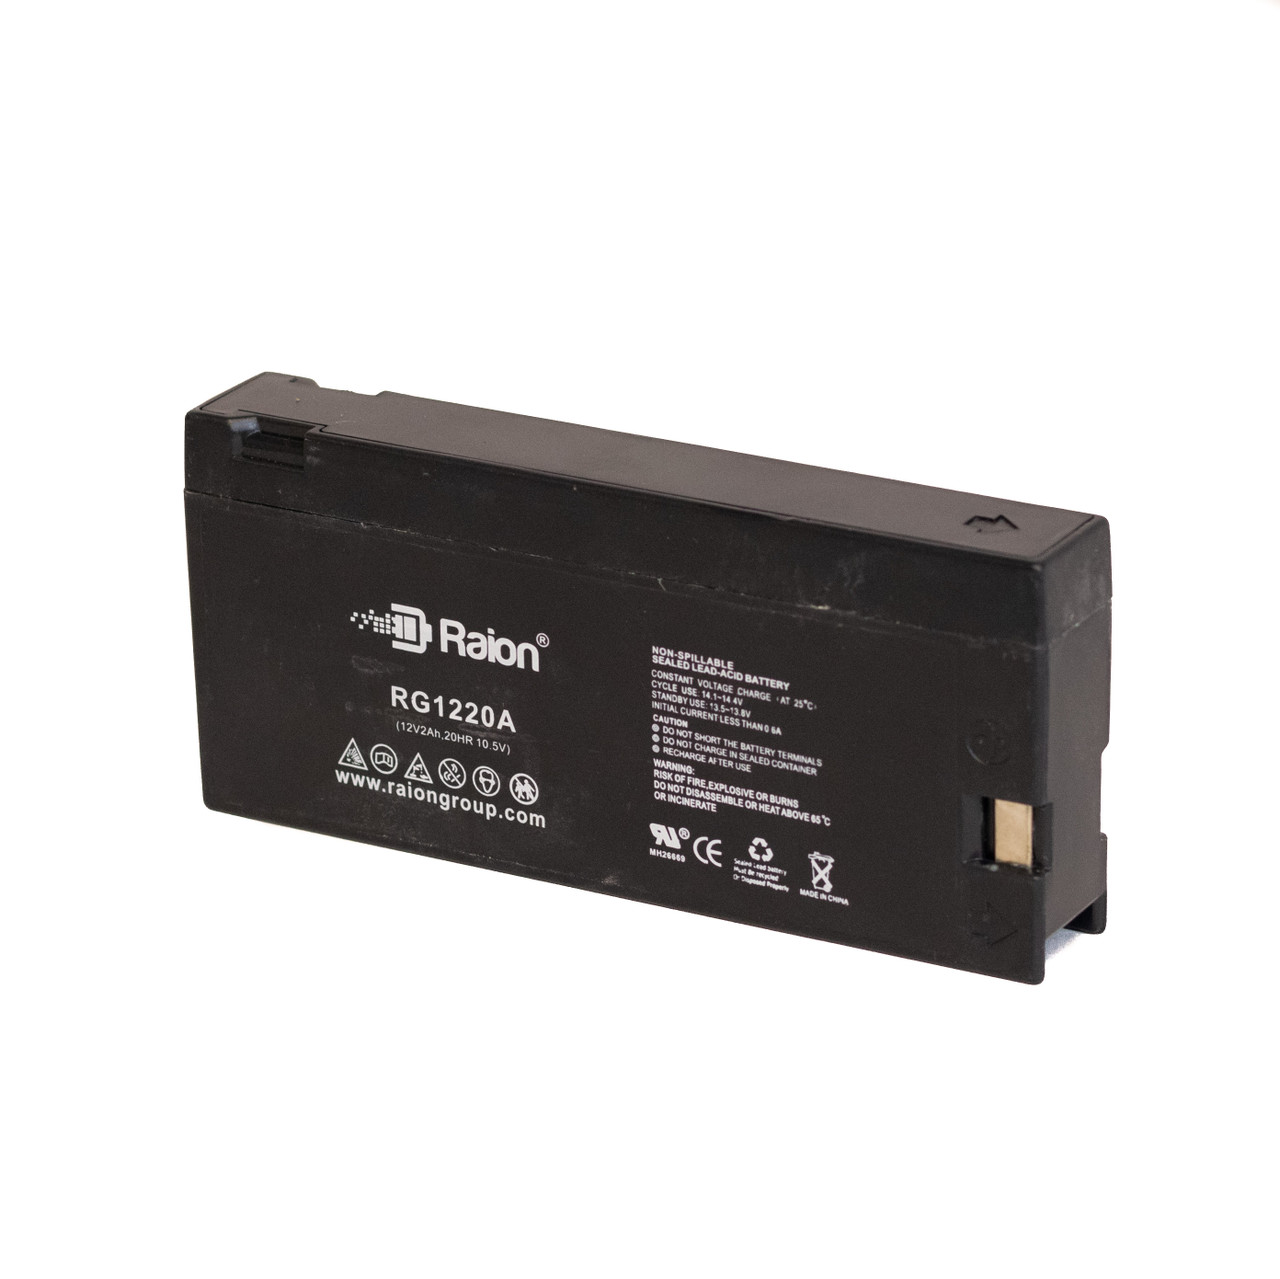 Raion Power RG1220A Replacement Battery for Sylvania VLC-218